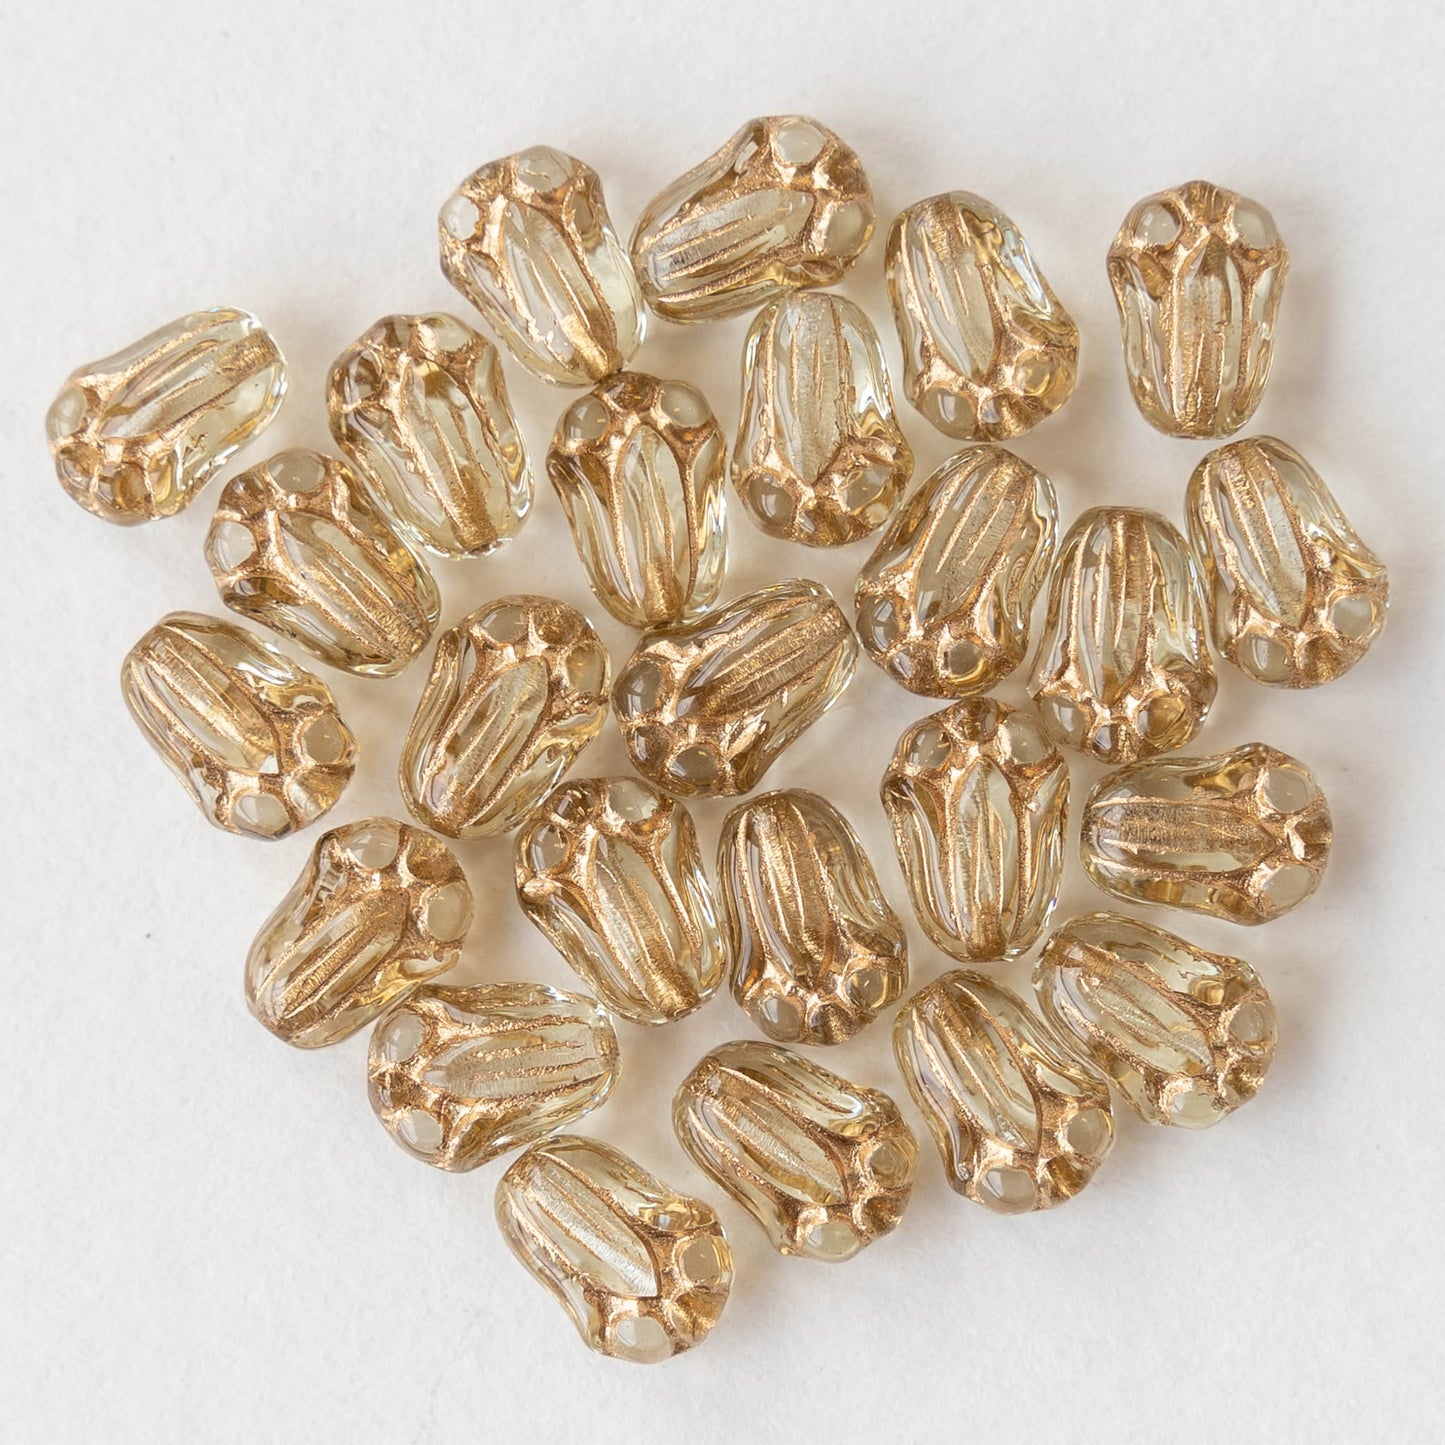 12mm Tulip Flower Beads - Crystal with Gold Wash - 20 Beads